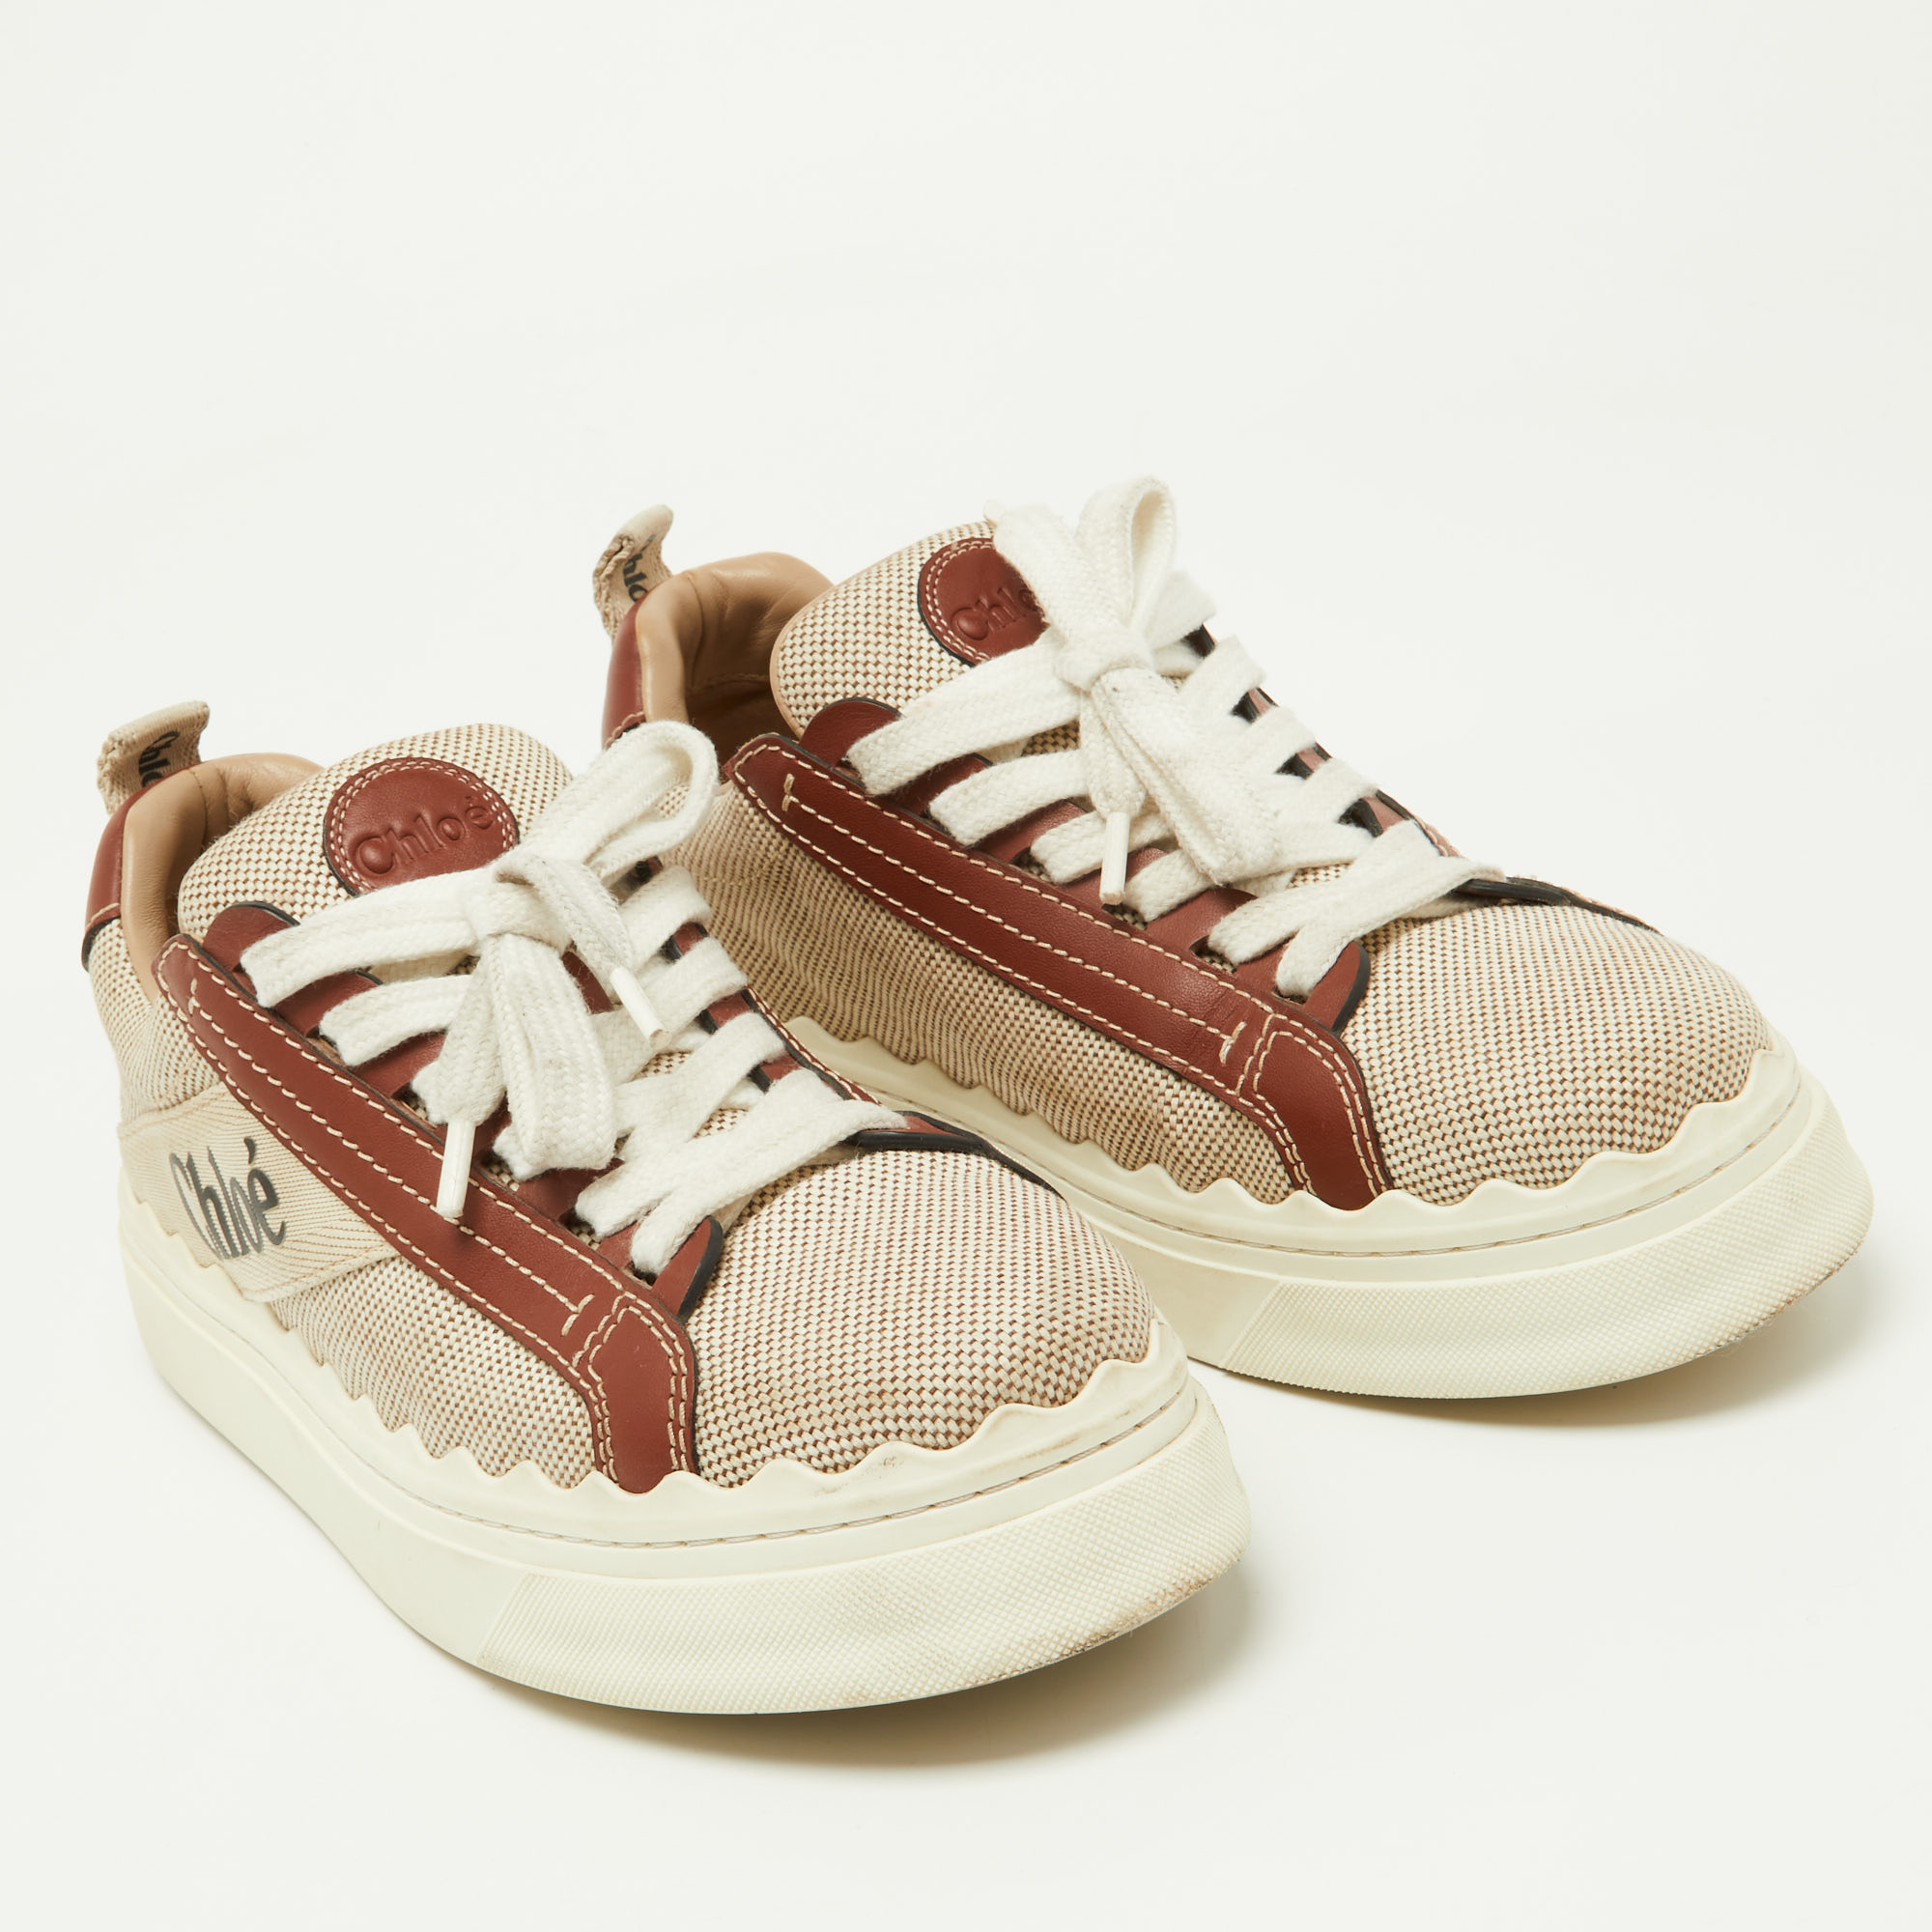 Chloe Brown/Beige Canvas And Leather Lauren Sneakers Size 39